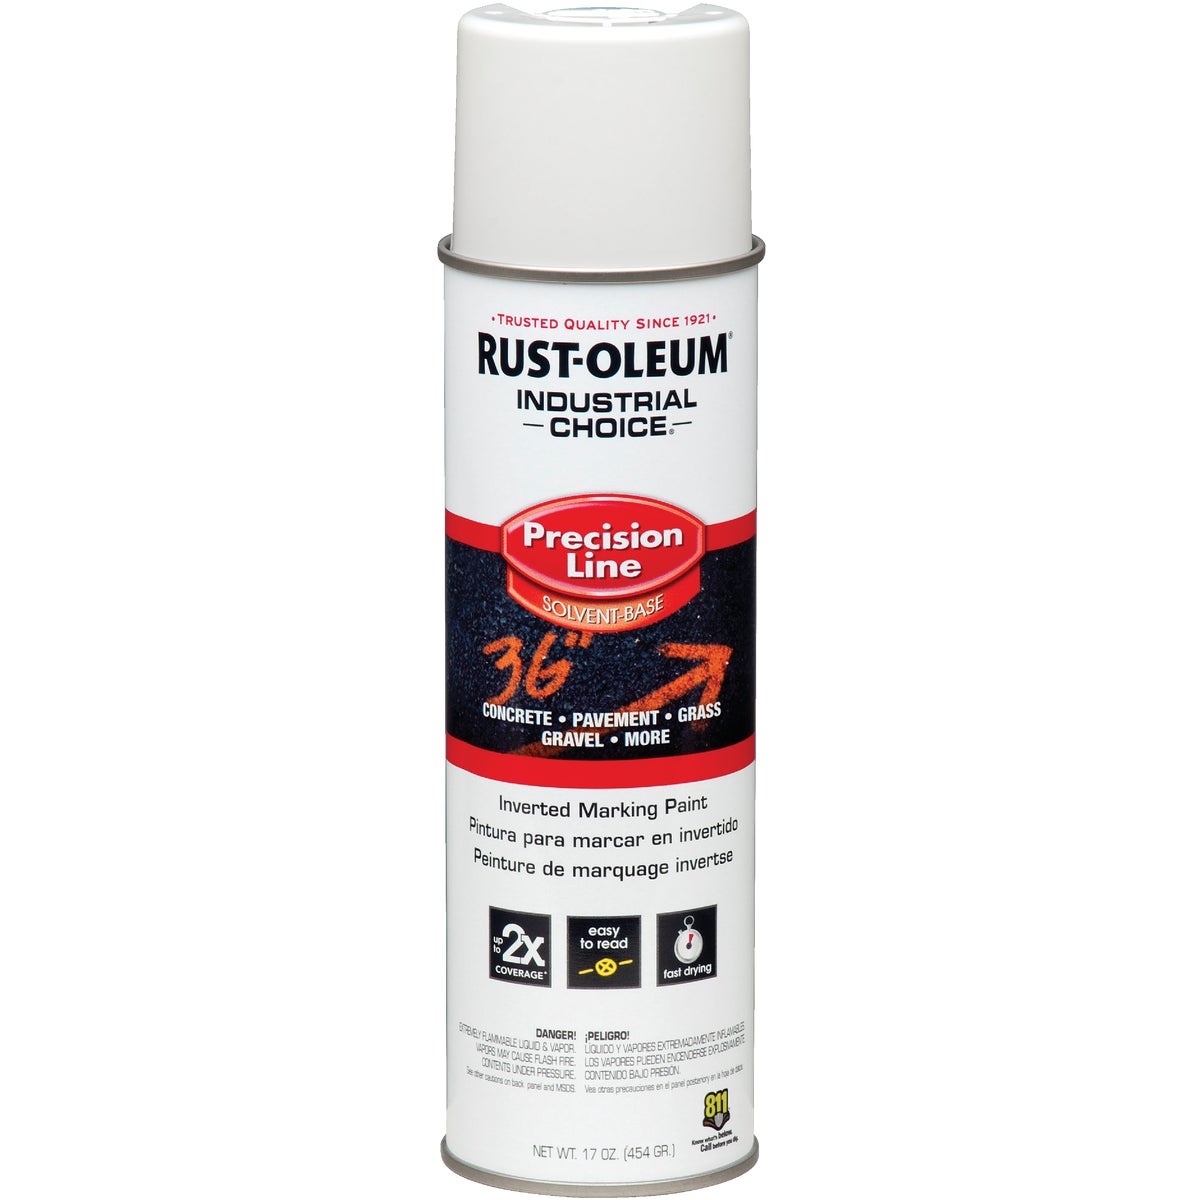 Rust-Oleum Industrial Choice White 17 Oz. Inverted Marking Spray Paint